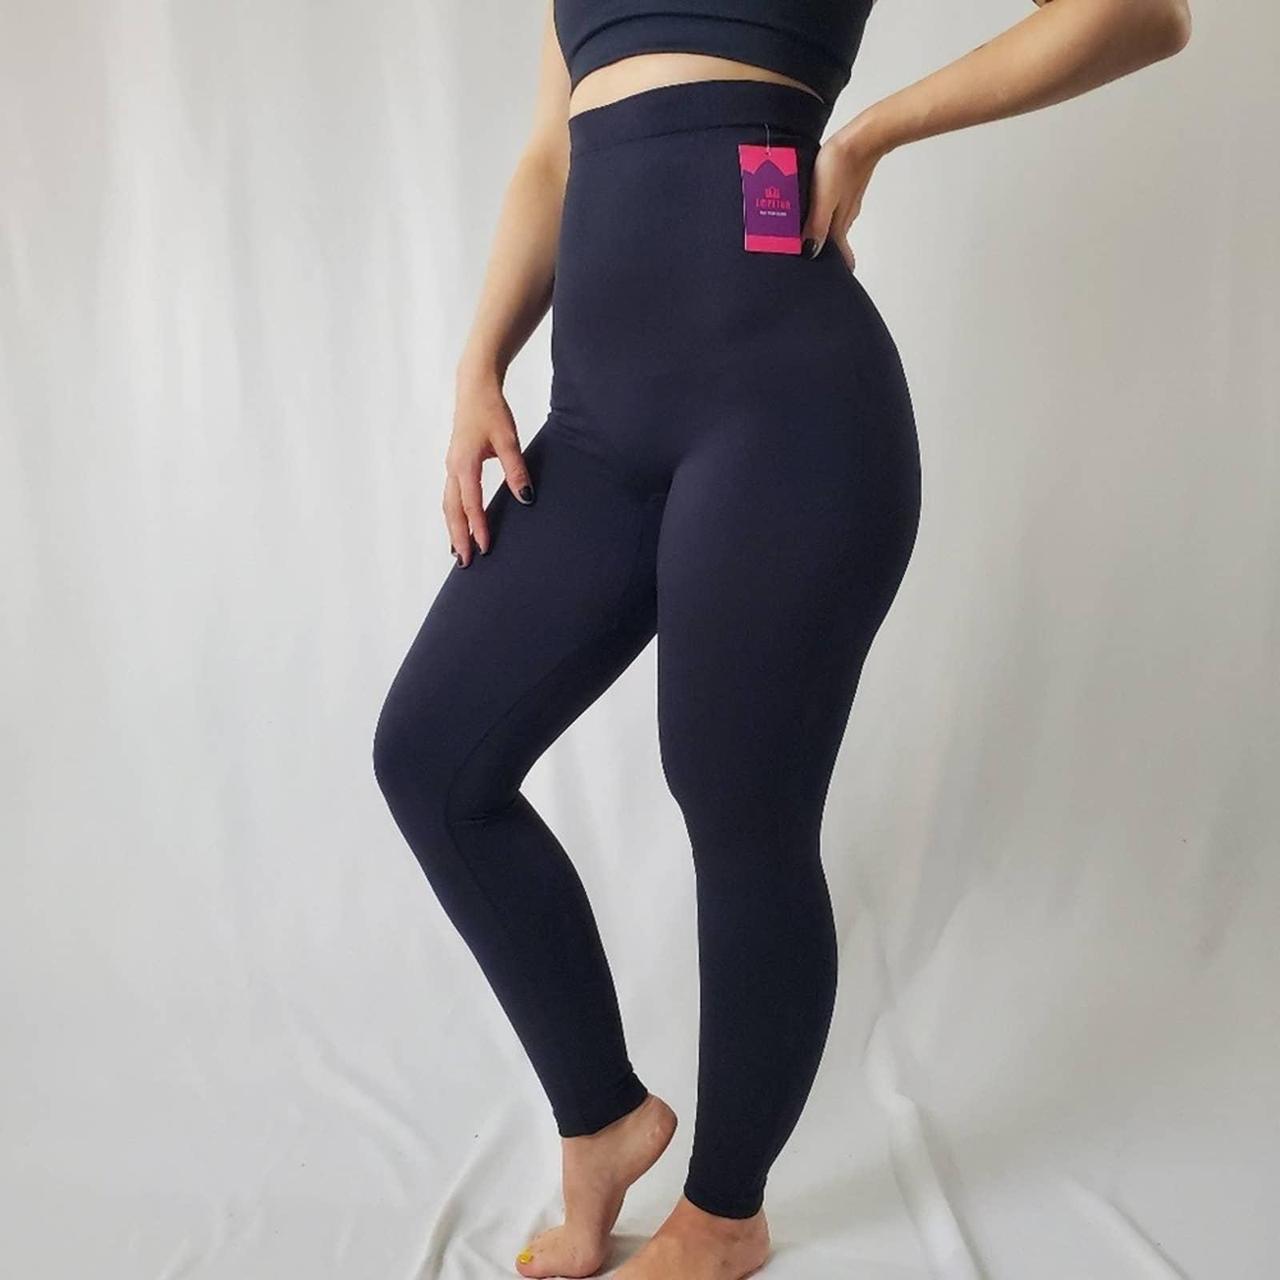 Empetua High Waisted Navy Blue Shaping Leggings Size Small Style